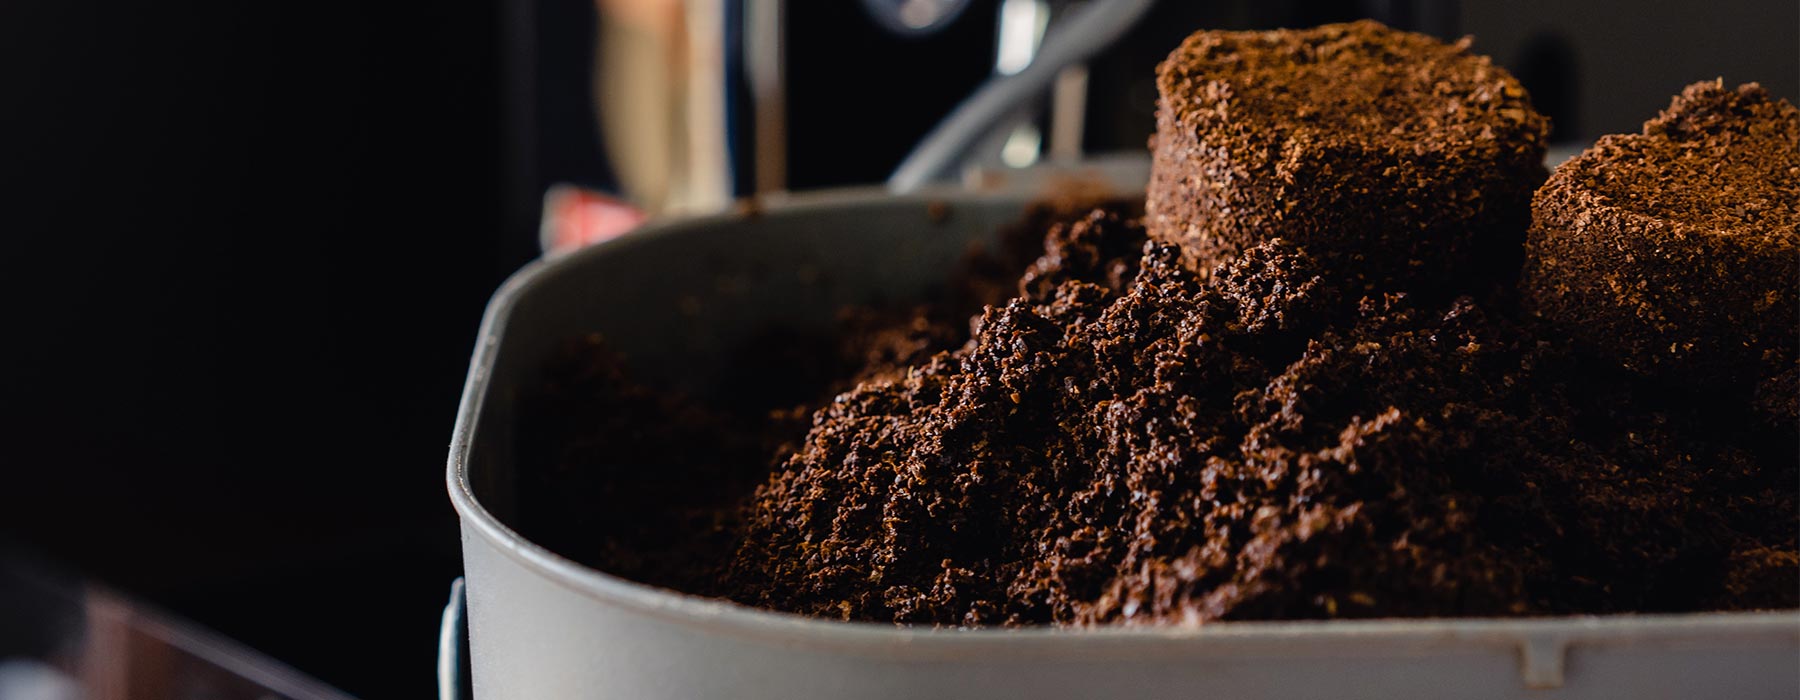 The 10 best ways to recycle coffee grounds: Using coffee grounds to get rid of bad smells - Blog by EspressoWorks